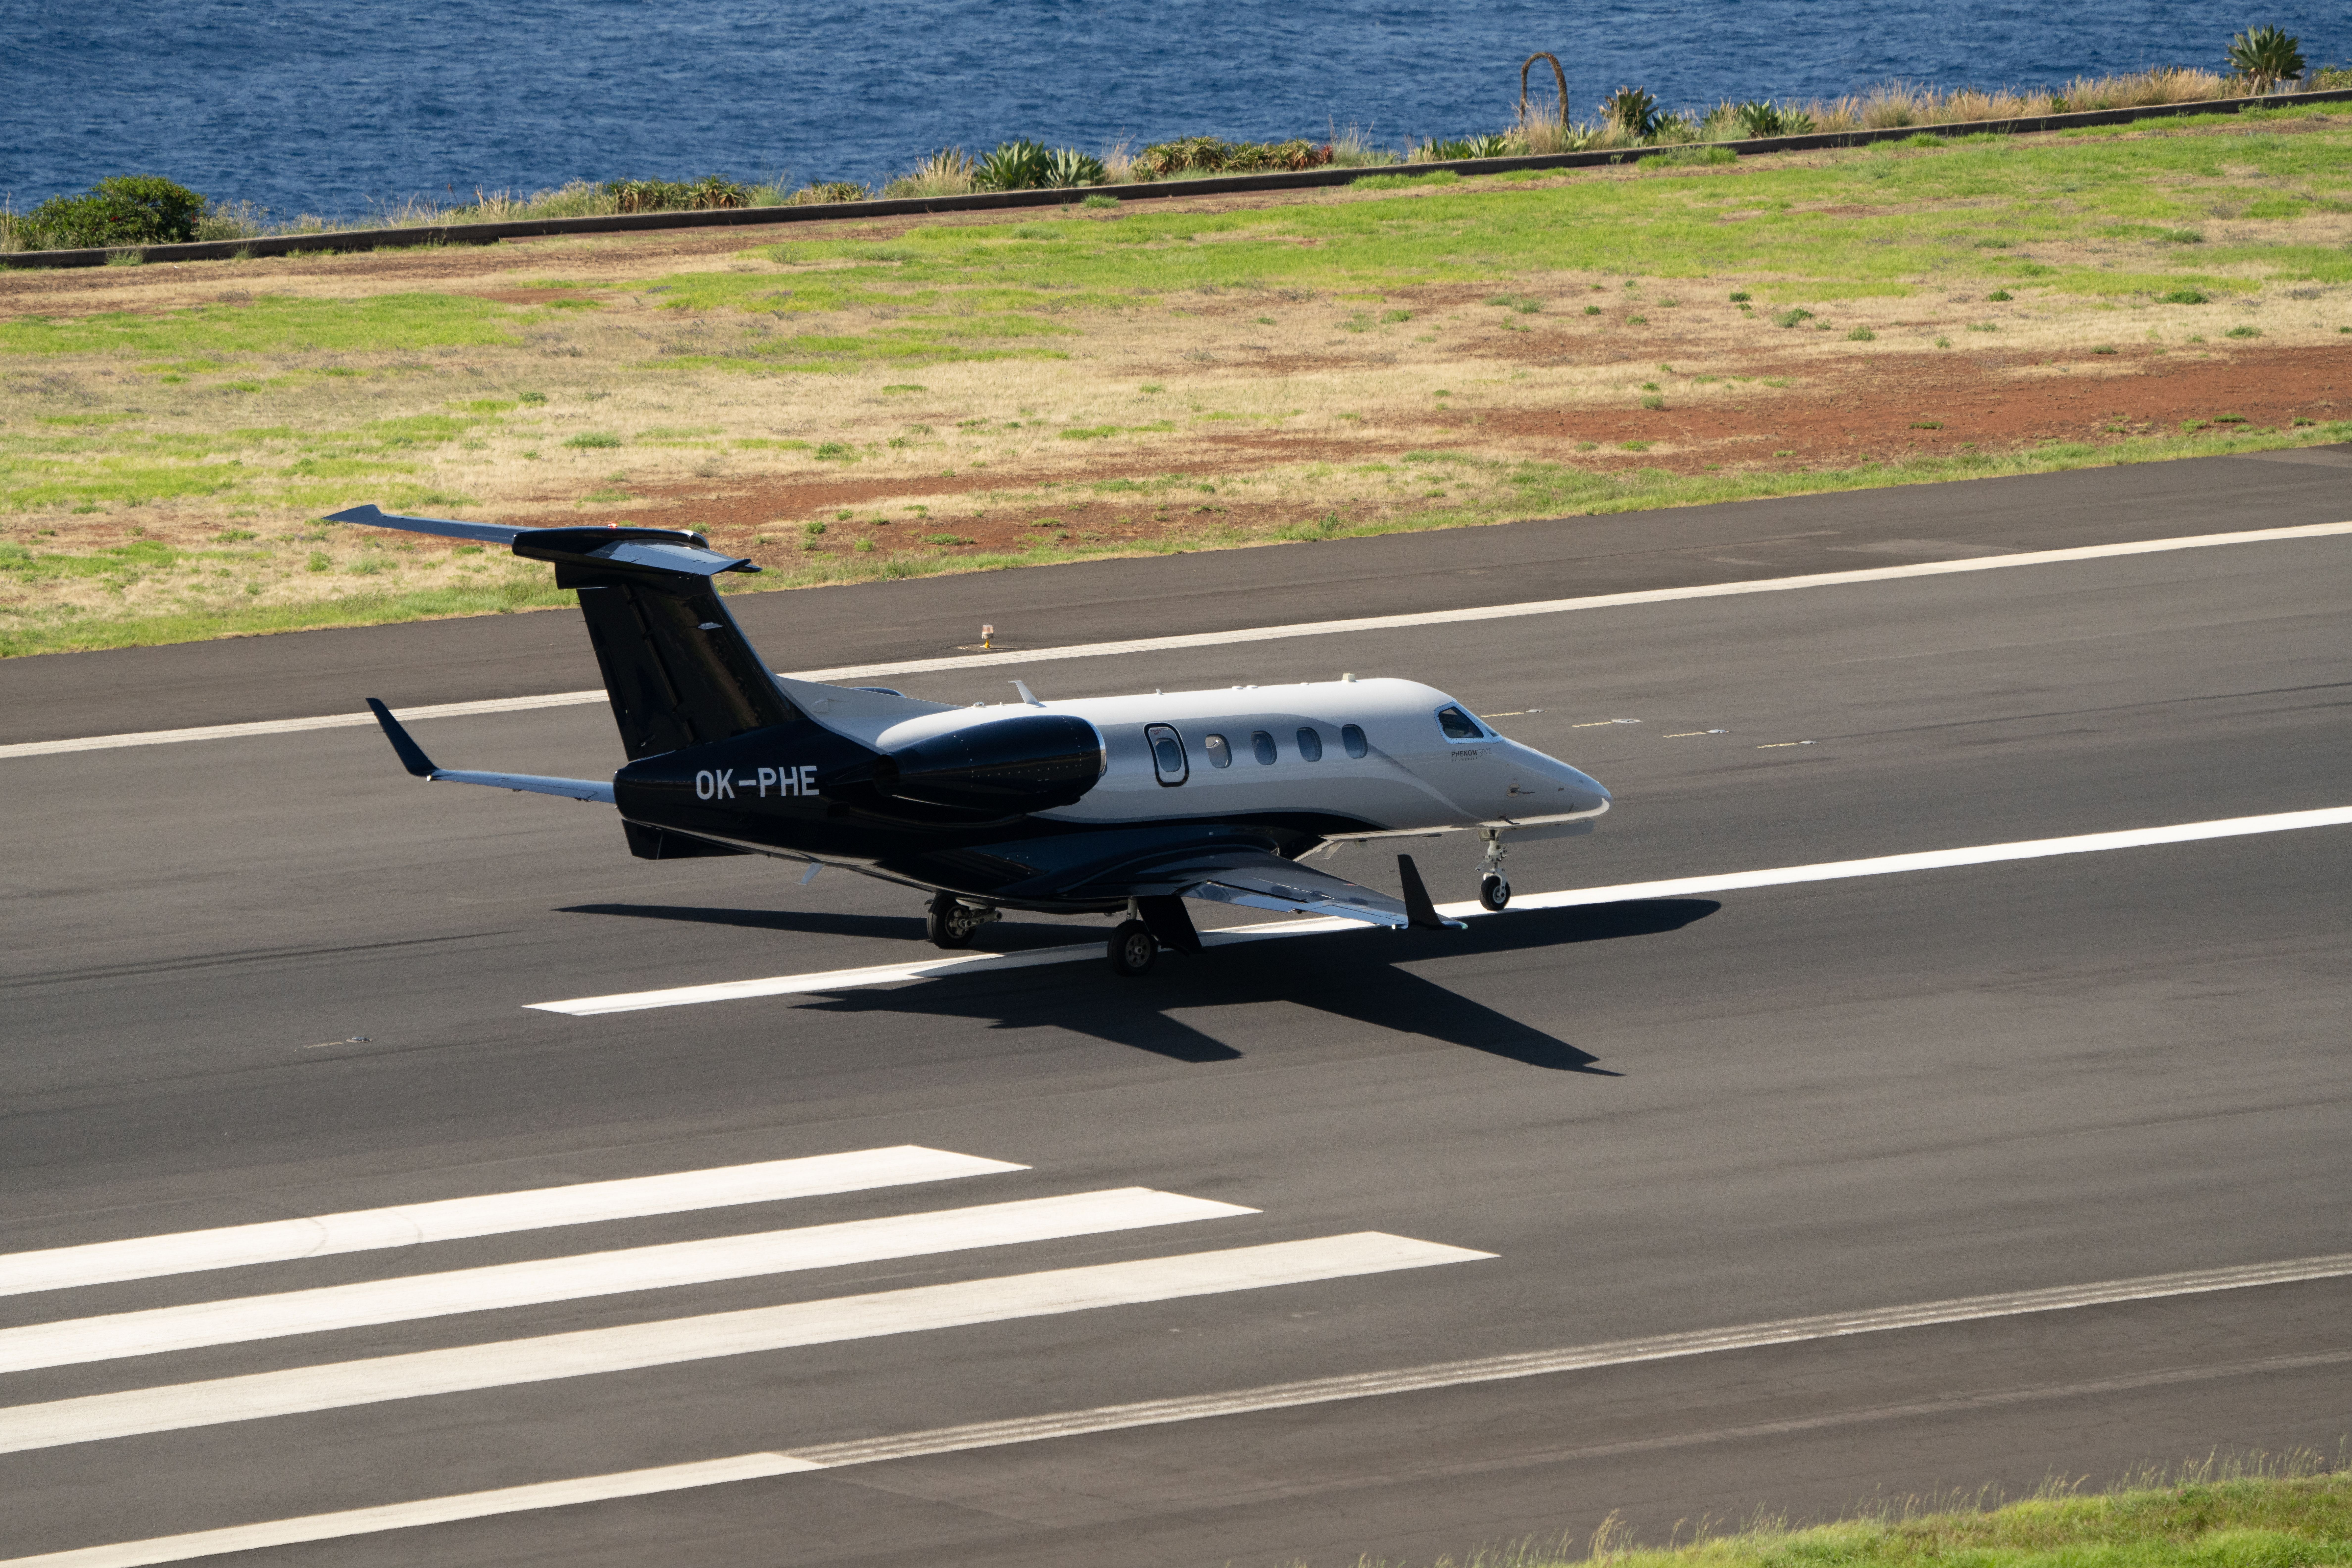 An Embraer Phenom 300 on a runway.